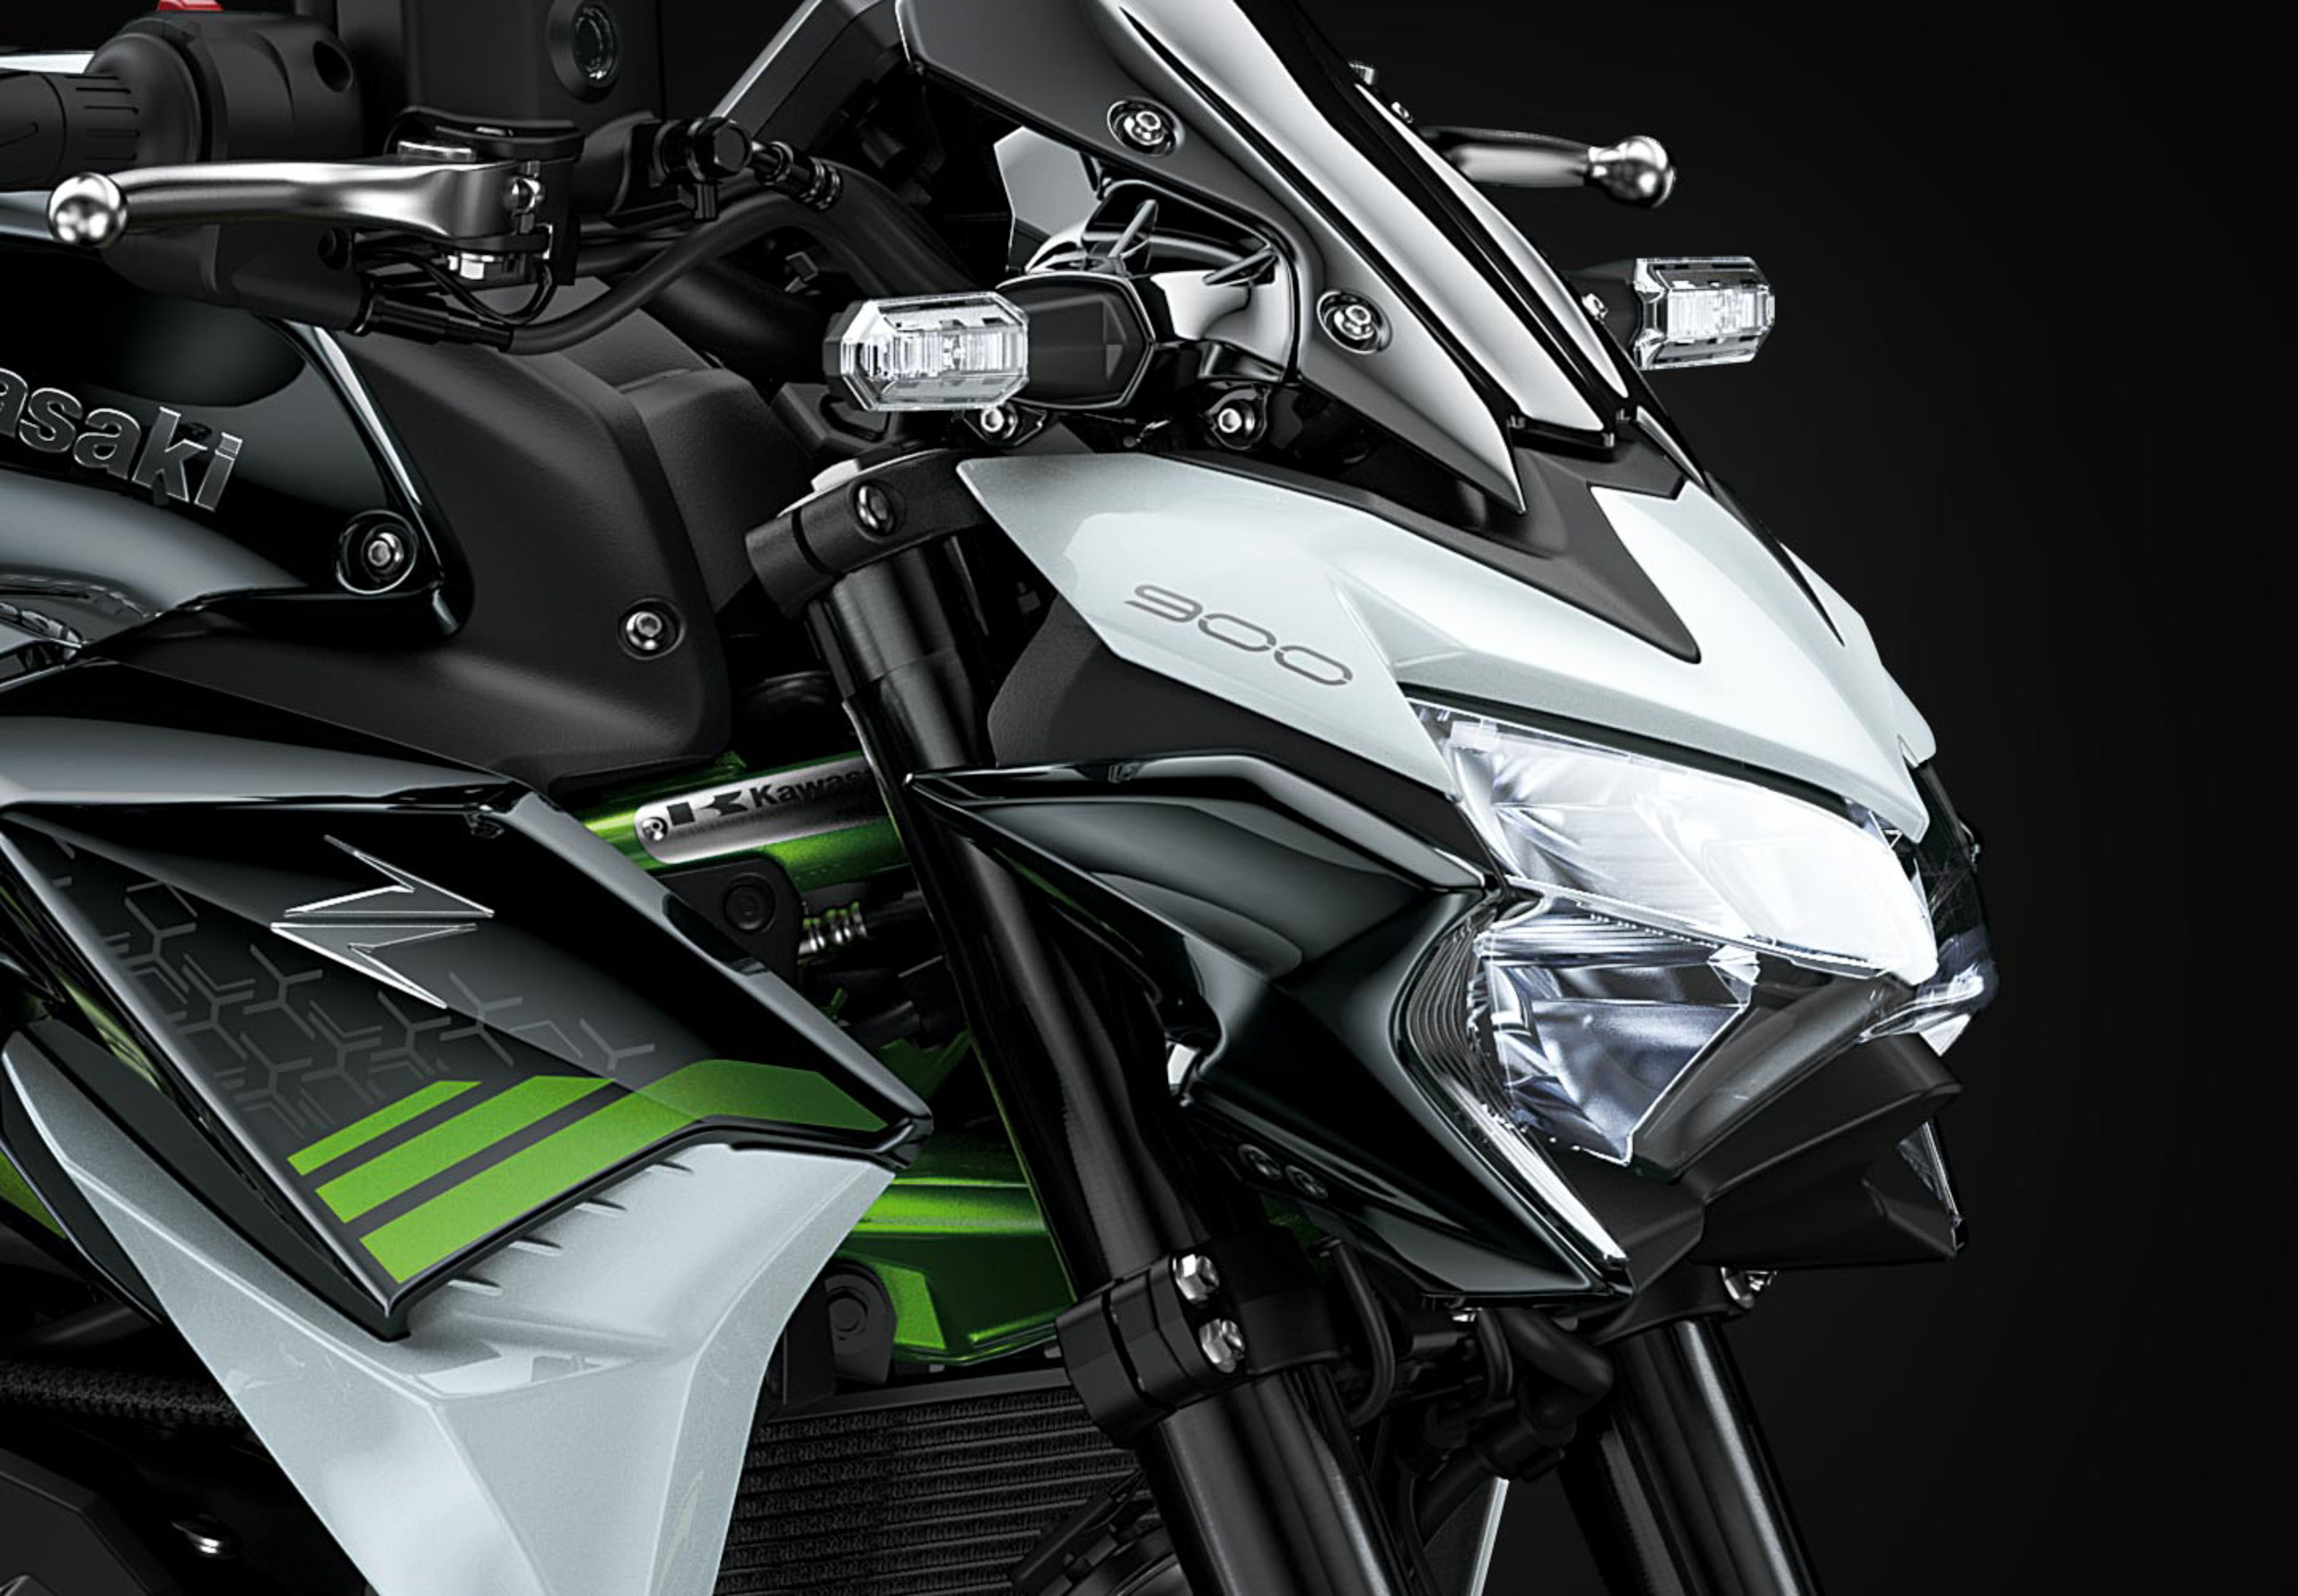 Kawasaki Releases The 2023 Z900 And Z900 SE In Malaysia